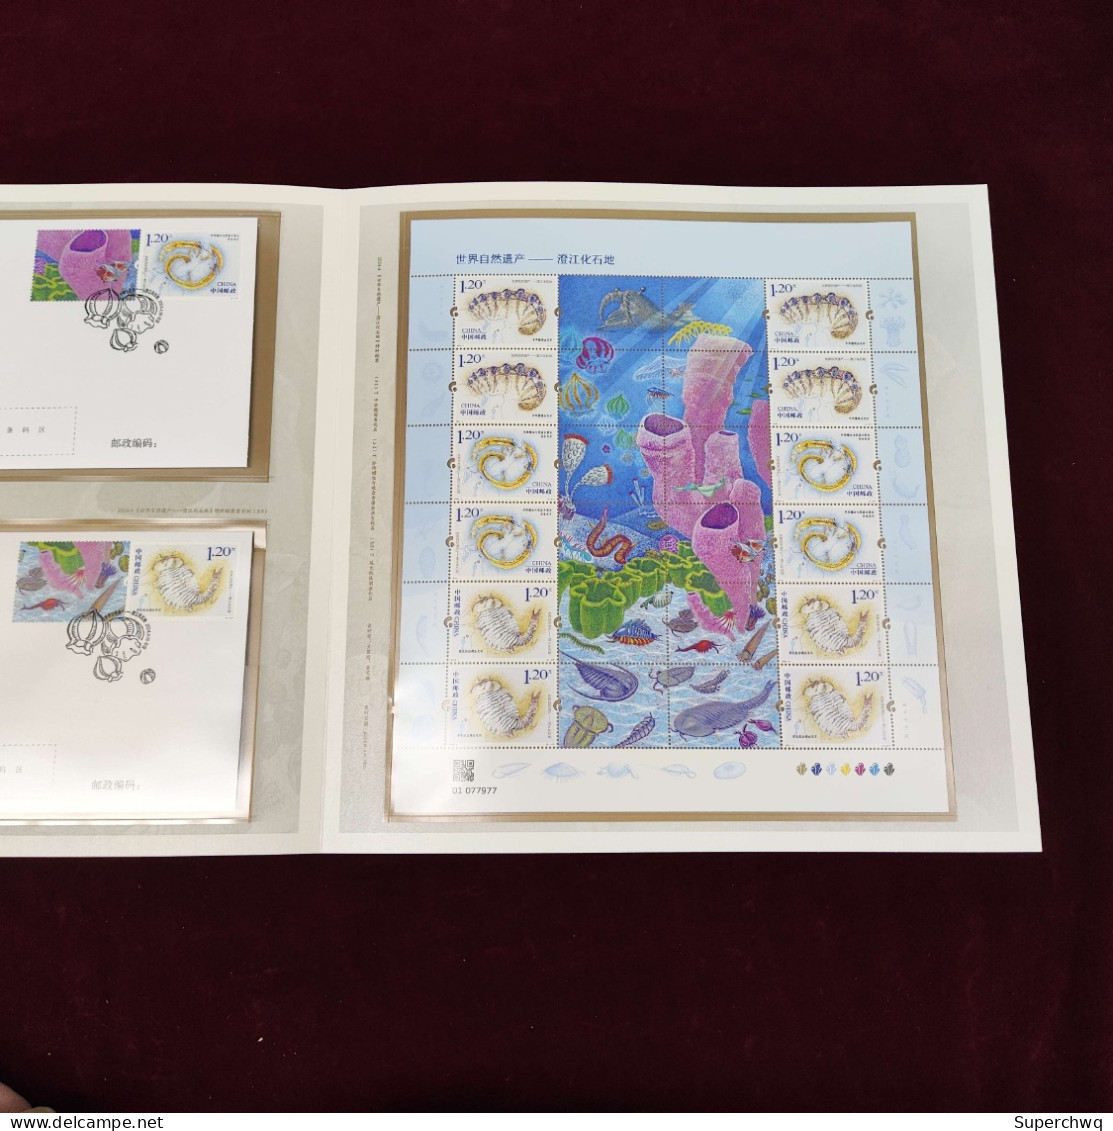 China stamp 2024-4 The "World Natural Heritage - Chengjiang Fossil Land" edition coupon includes tickets: a set of three